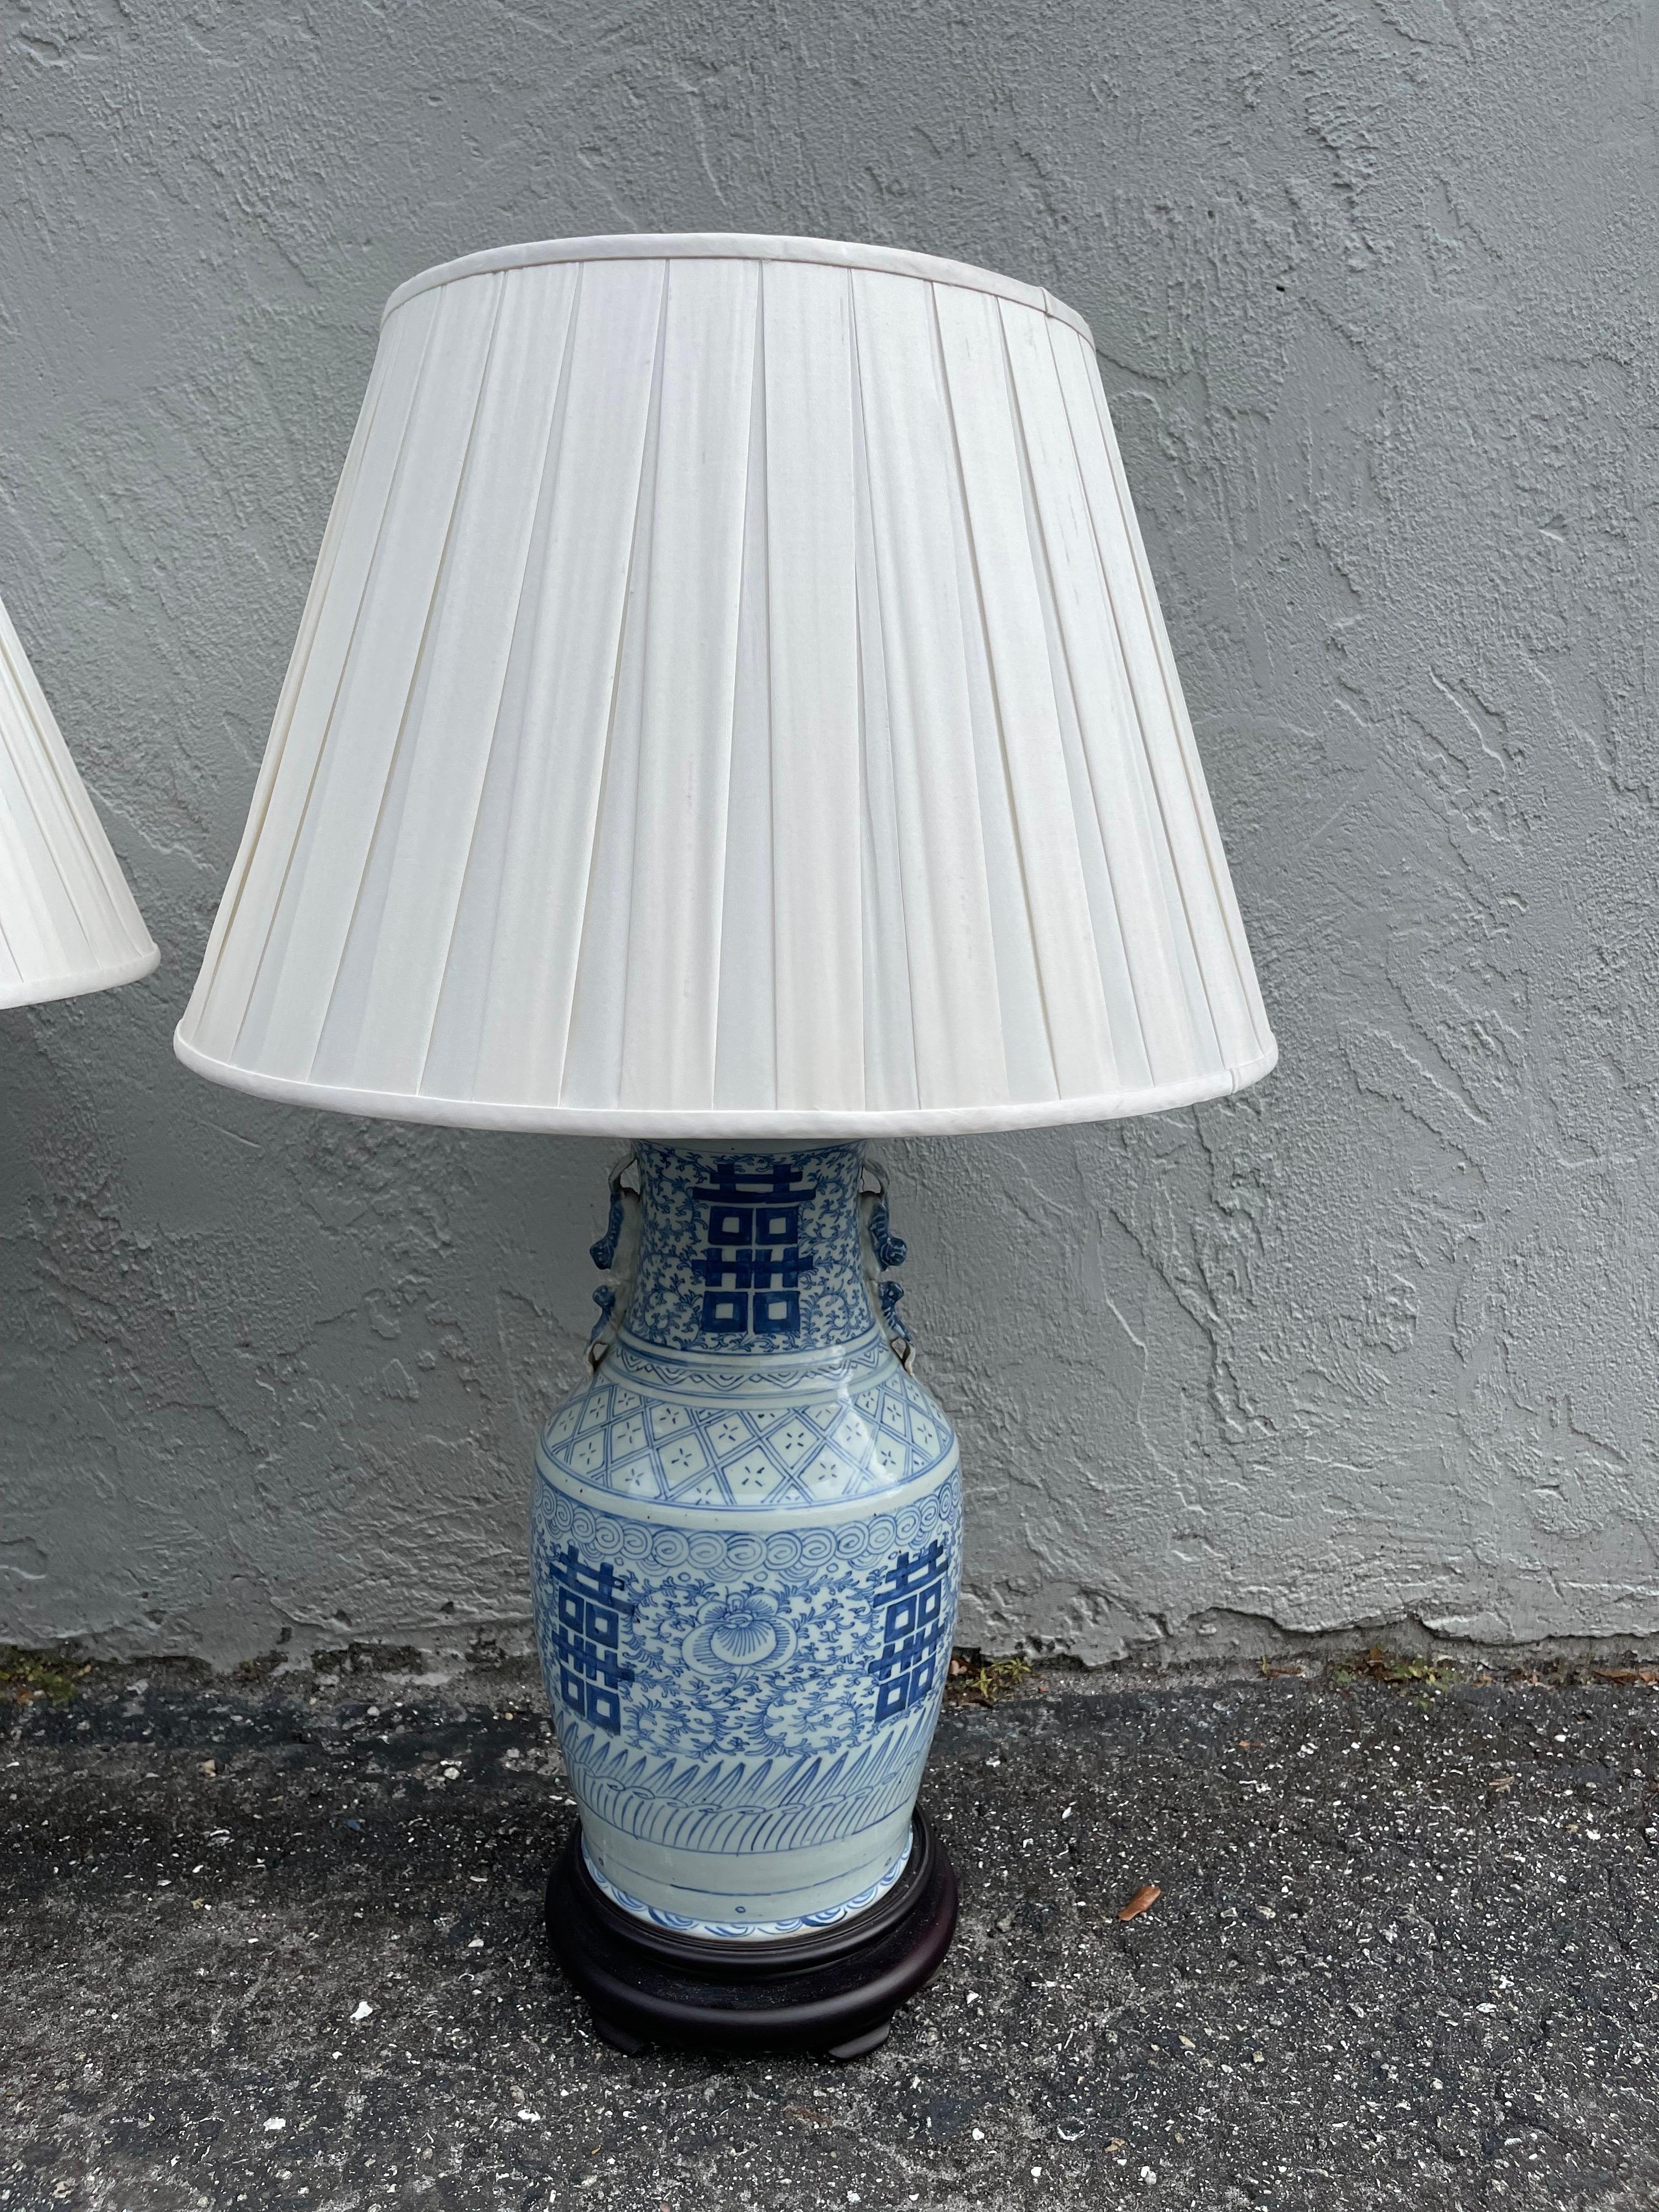 Vintage pair of large blue & white Chinese lamps with white shades. These beautiful lamps were made from 19th century vases. Newer shades.